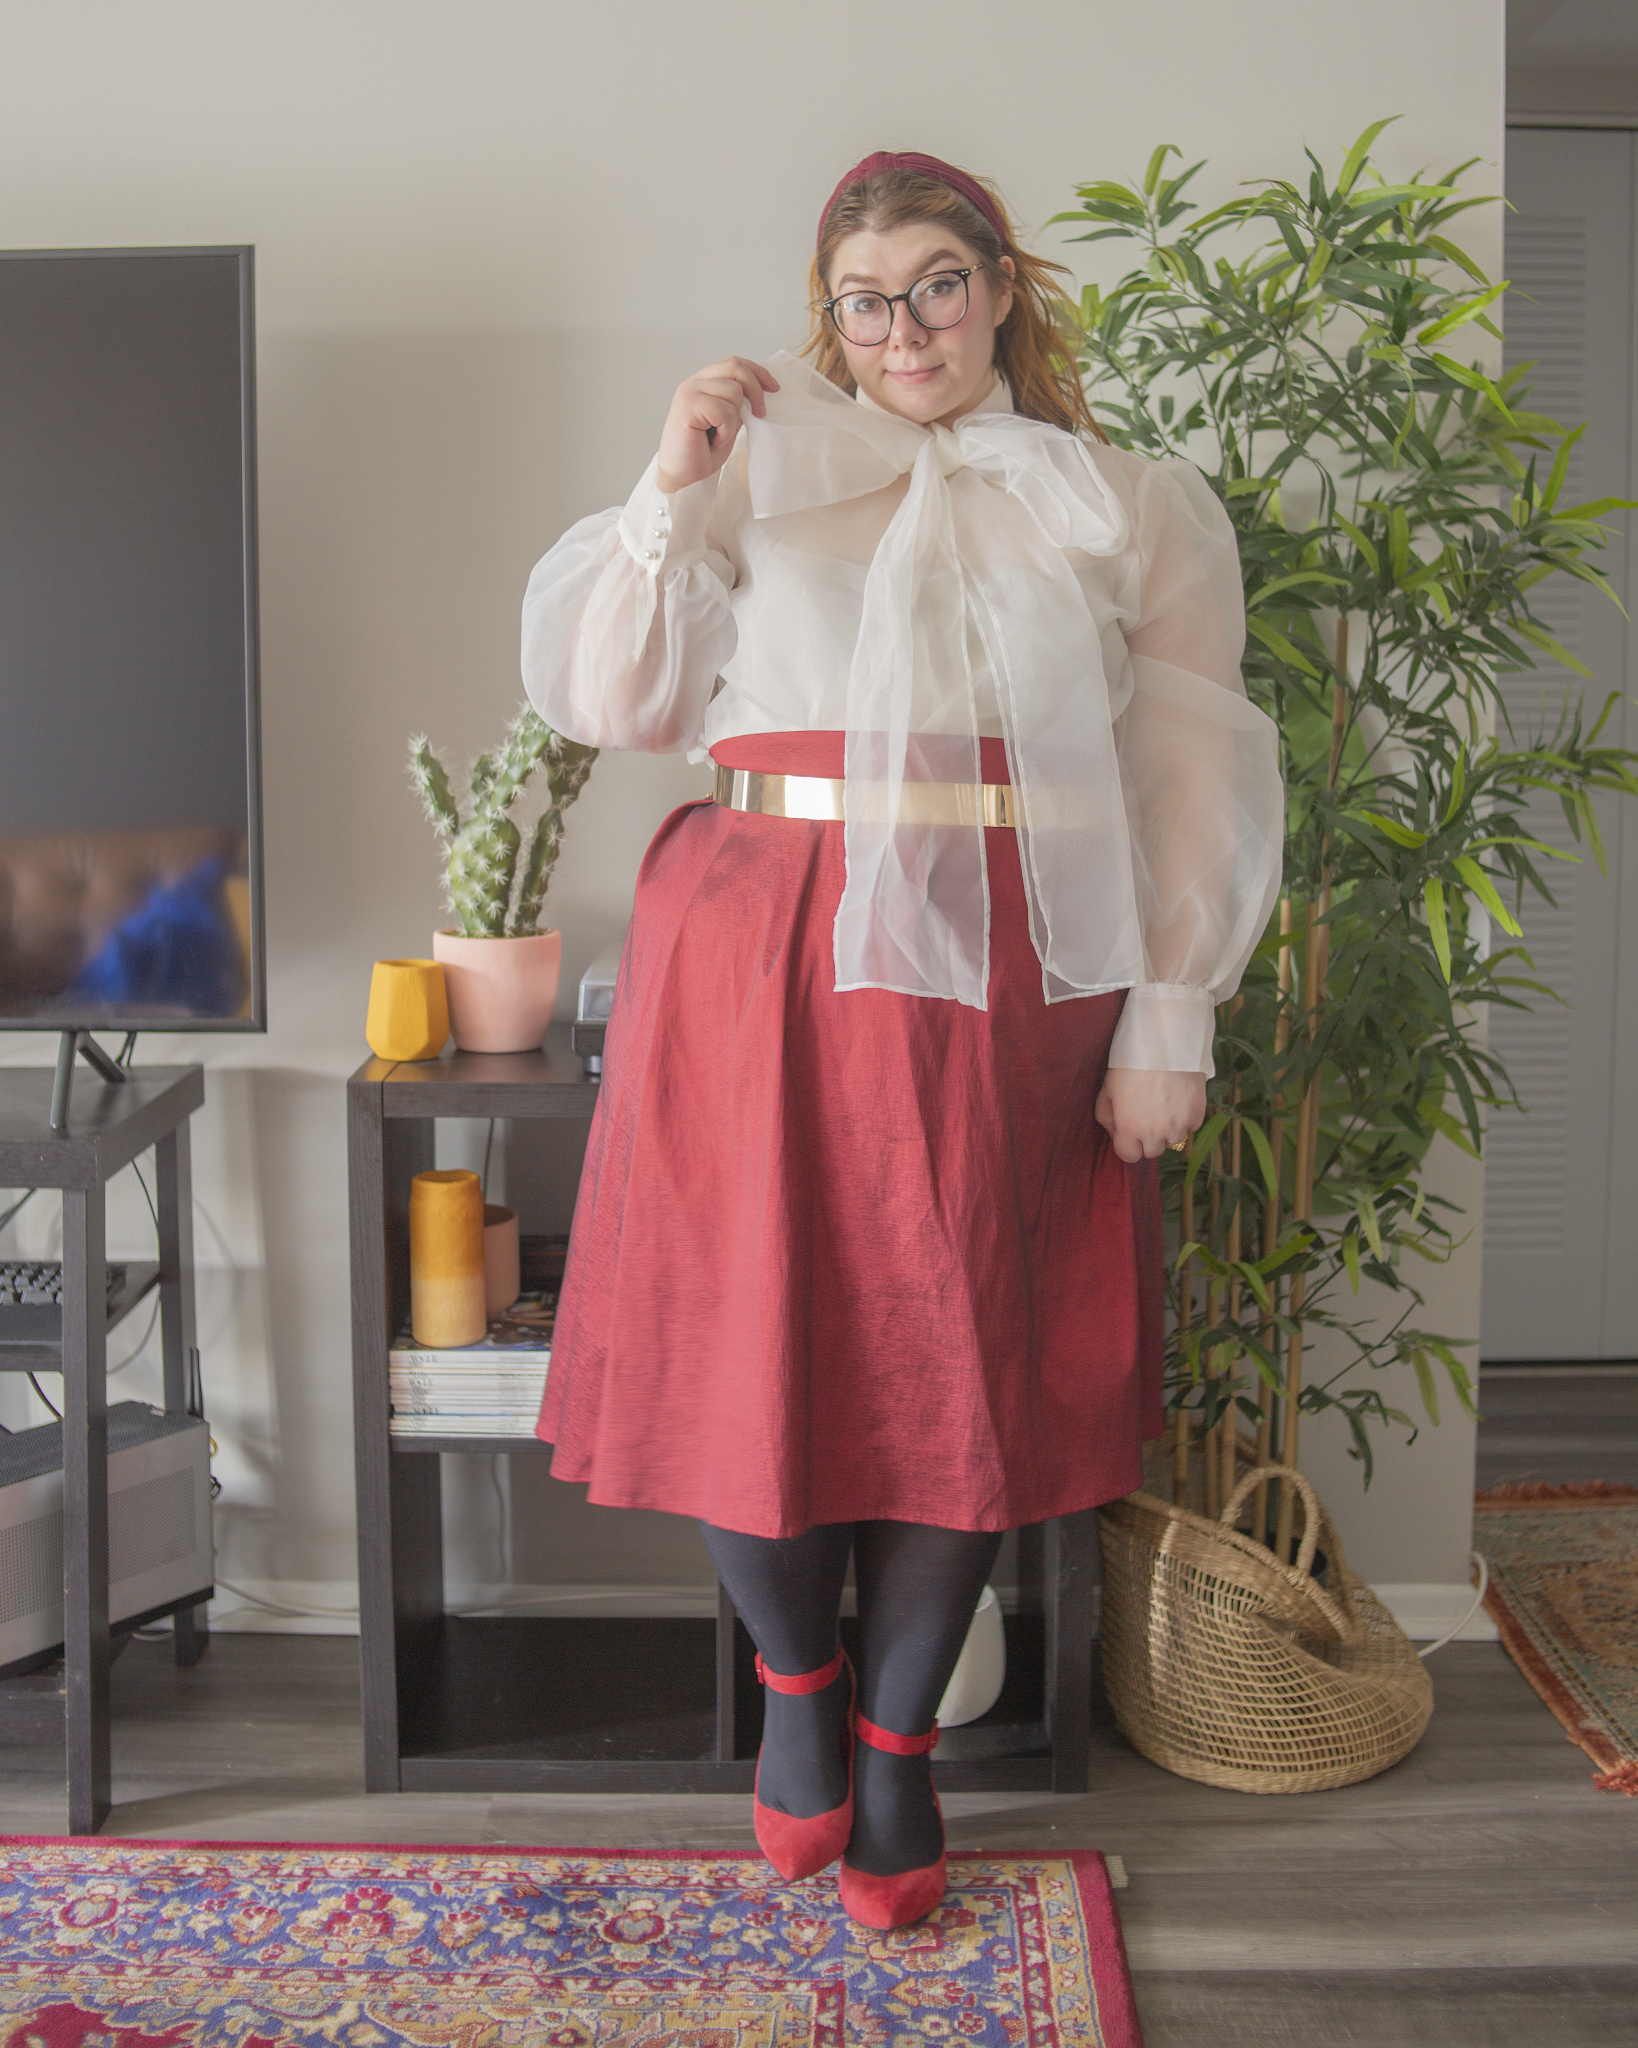 An outfit consisting of a sheer white pussy bow blouse under a white sweater, tucked into a red metallic midi skirt and red ankle strap heels.